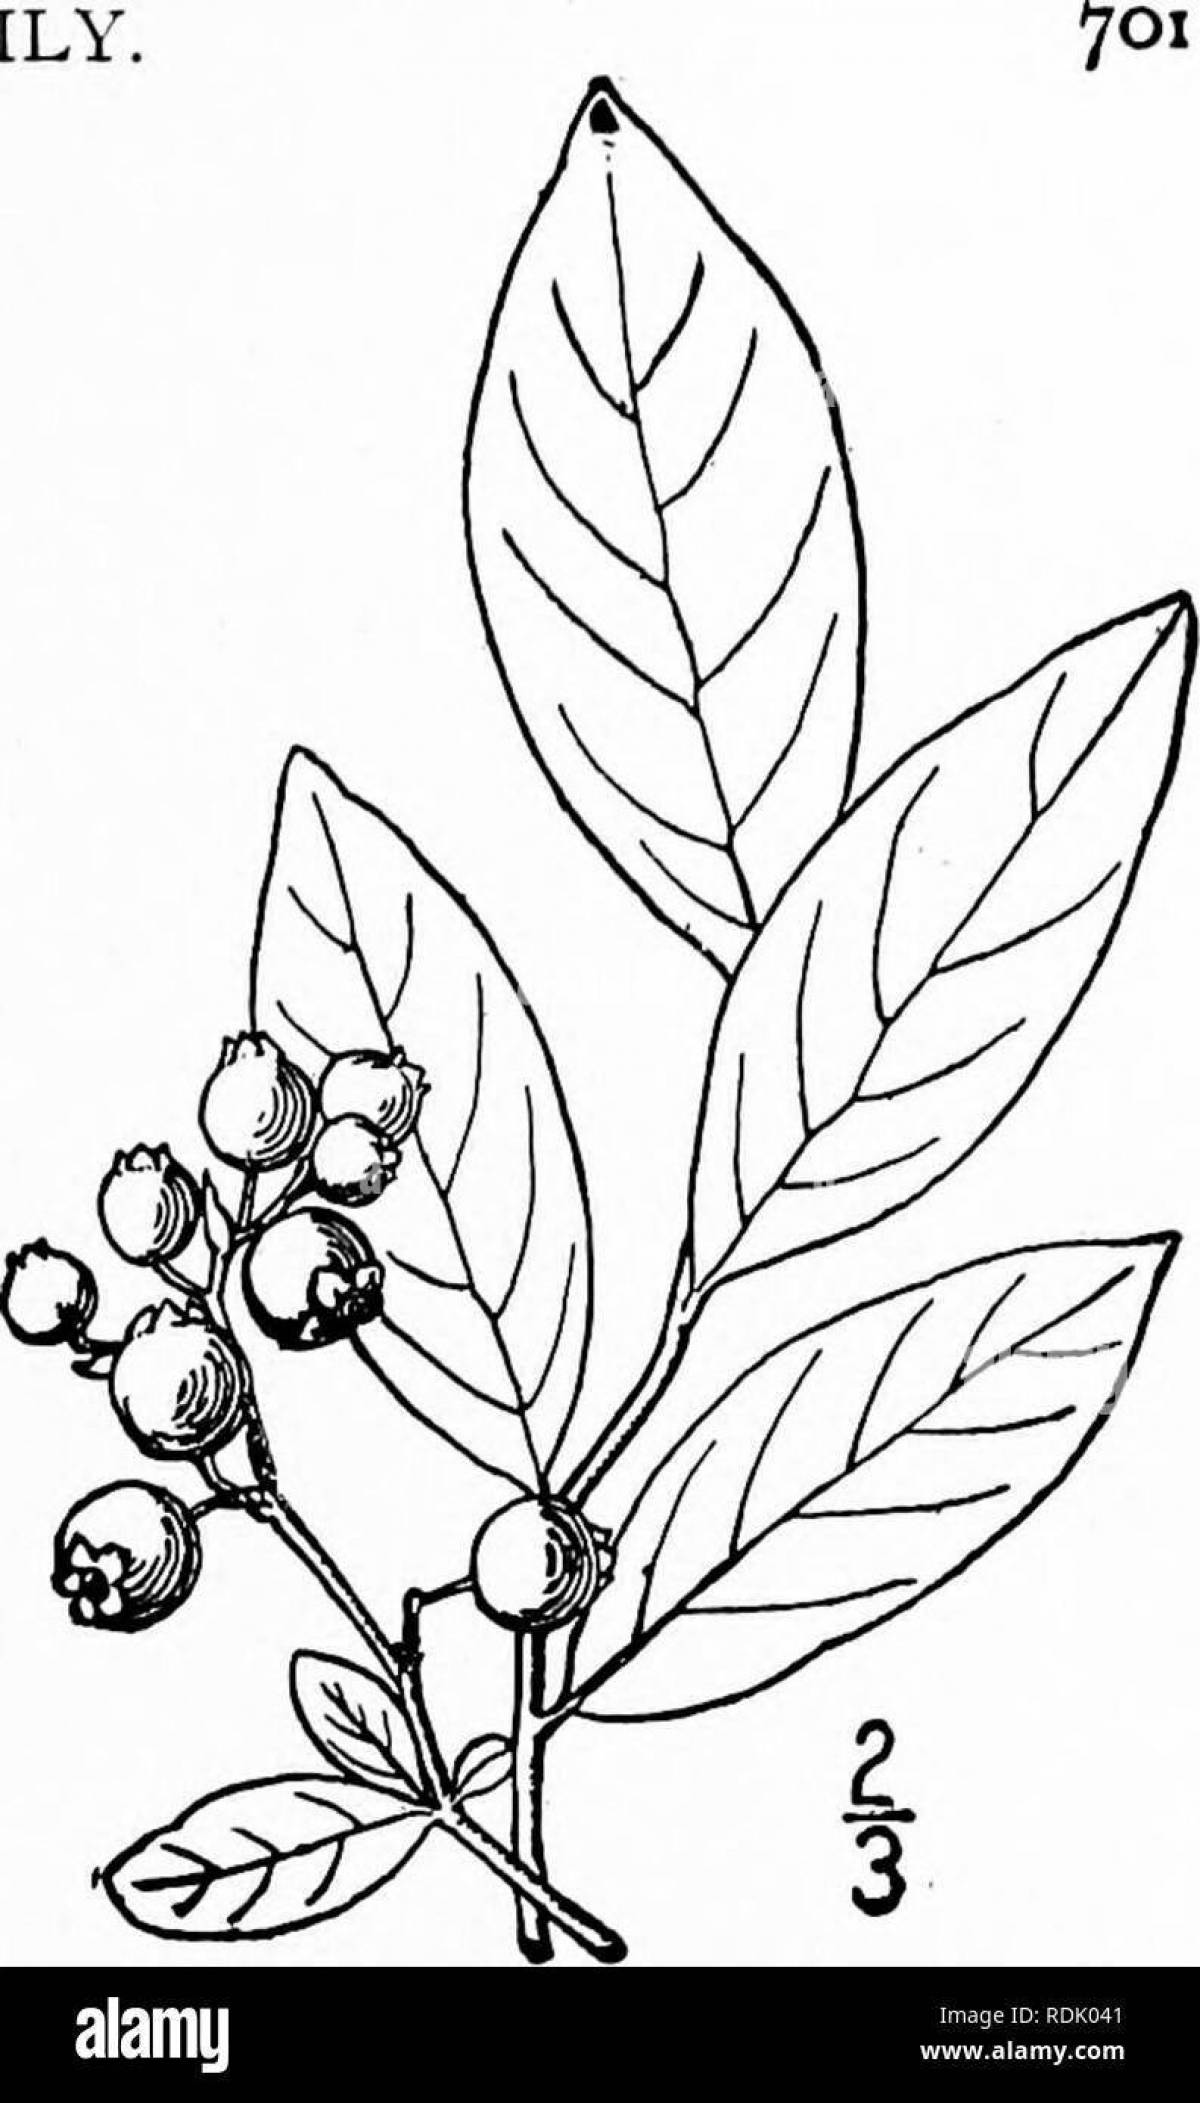 Color-frenzy blueberries coloring page for kids